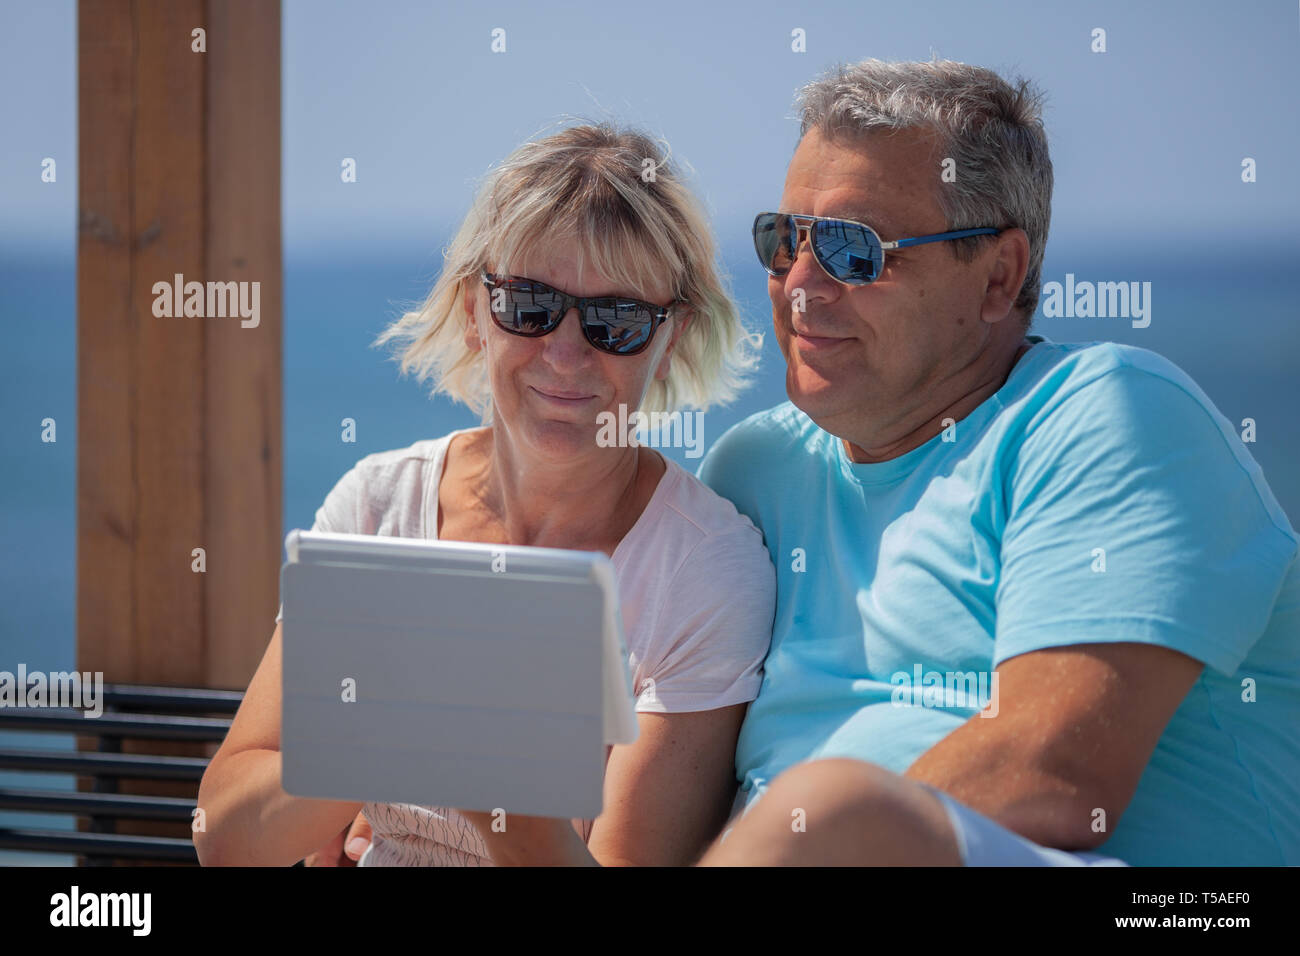 Parents on vacation Stock Photo